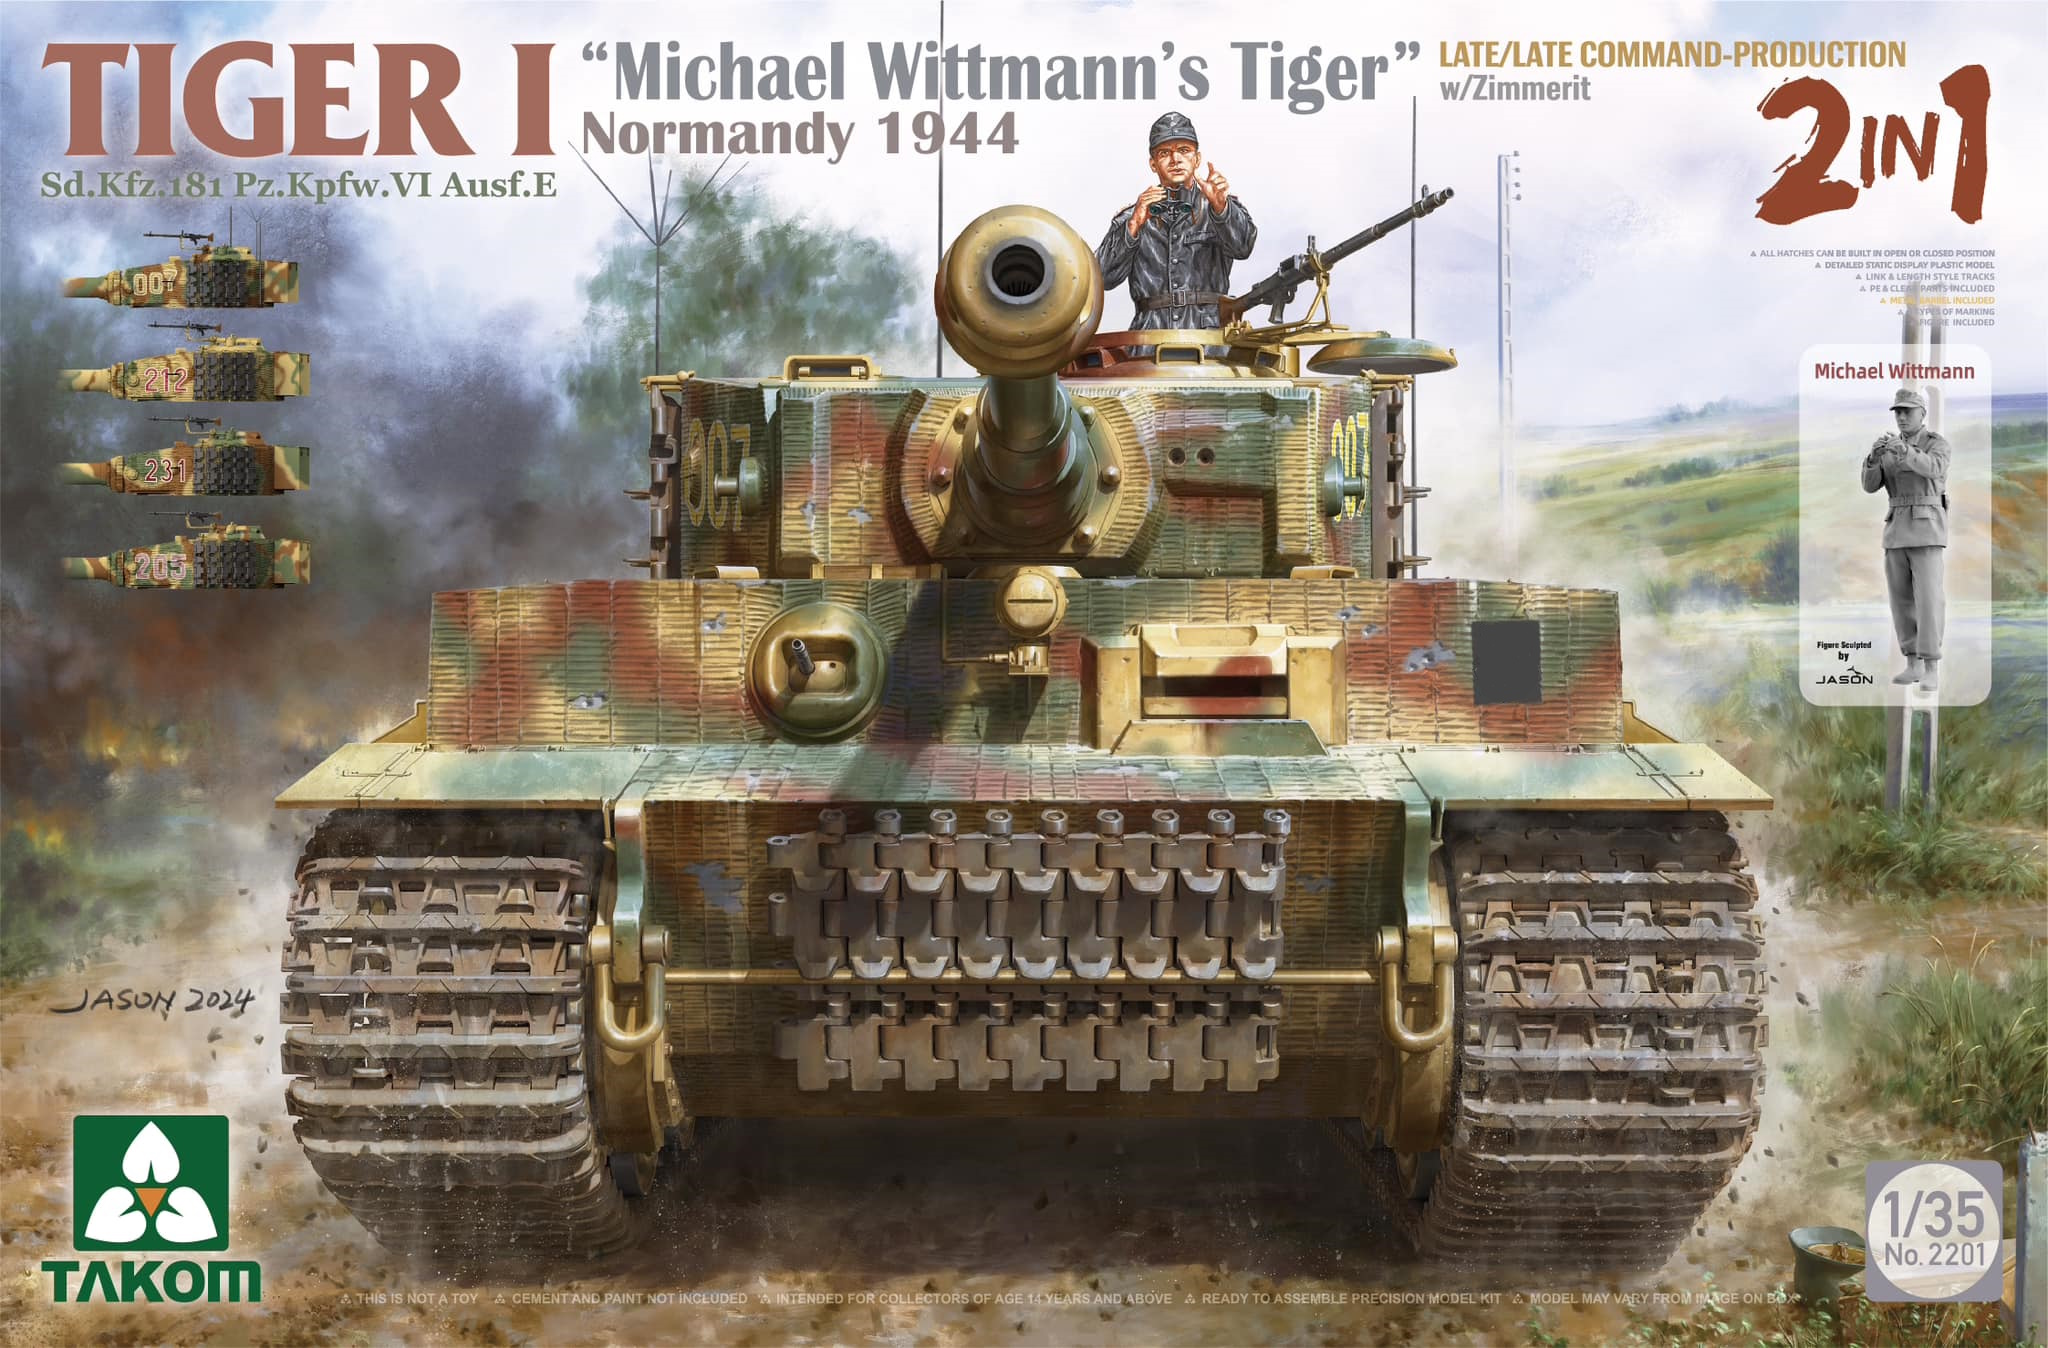 Tiger I "Michael Wittmann's Tiger" - Normandy 1944 - Late-Production w/Zimmerit - 2 in 1